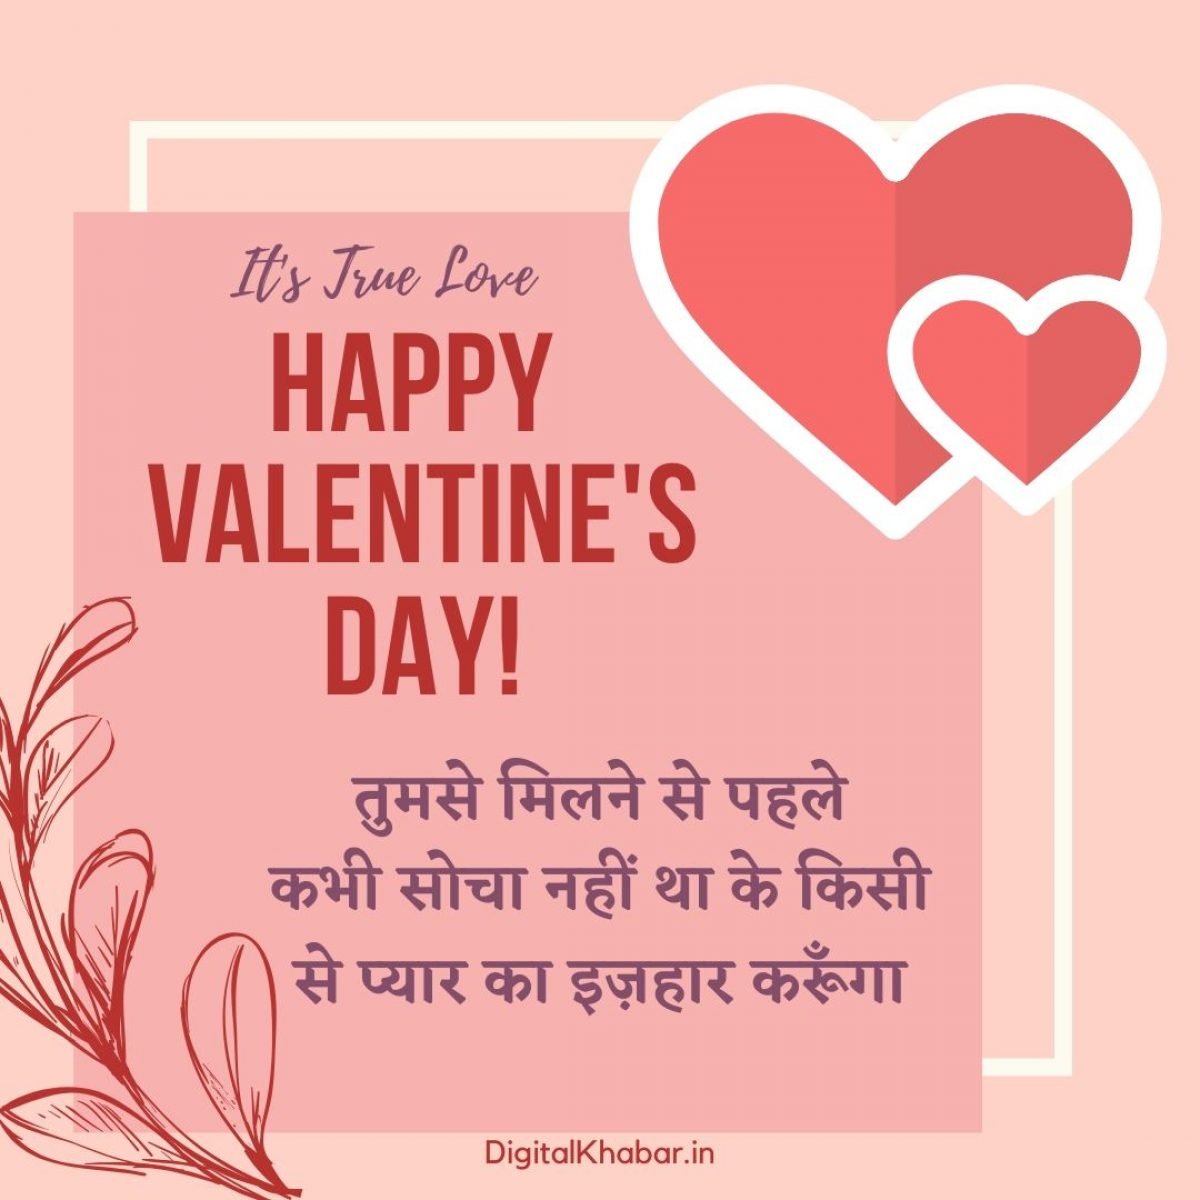 10 Best Valentines Day Images for Husband & Wife